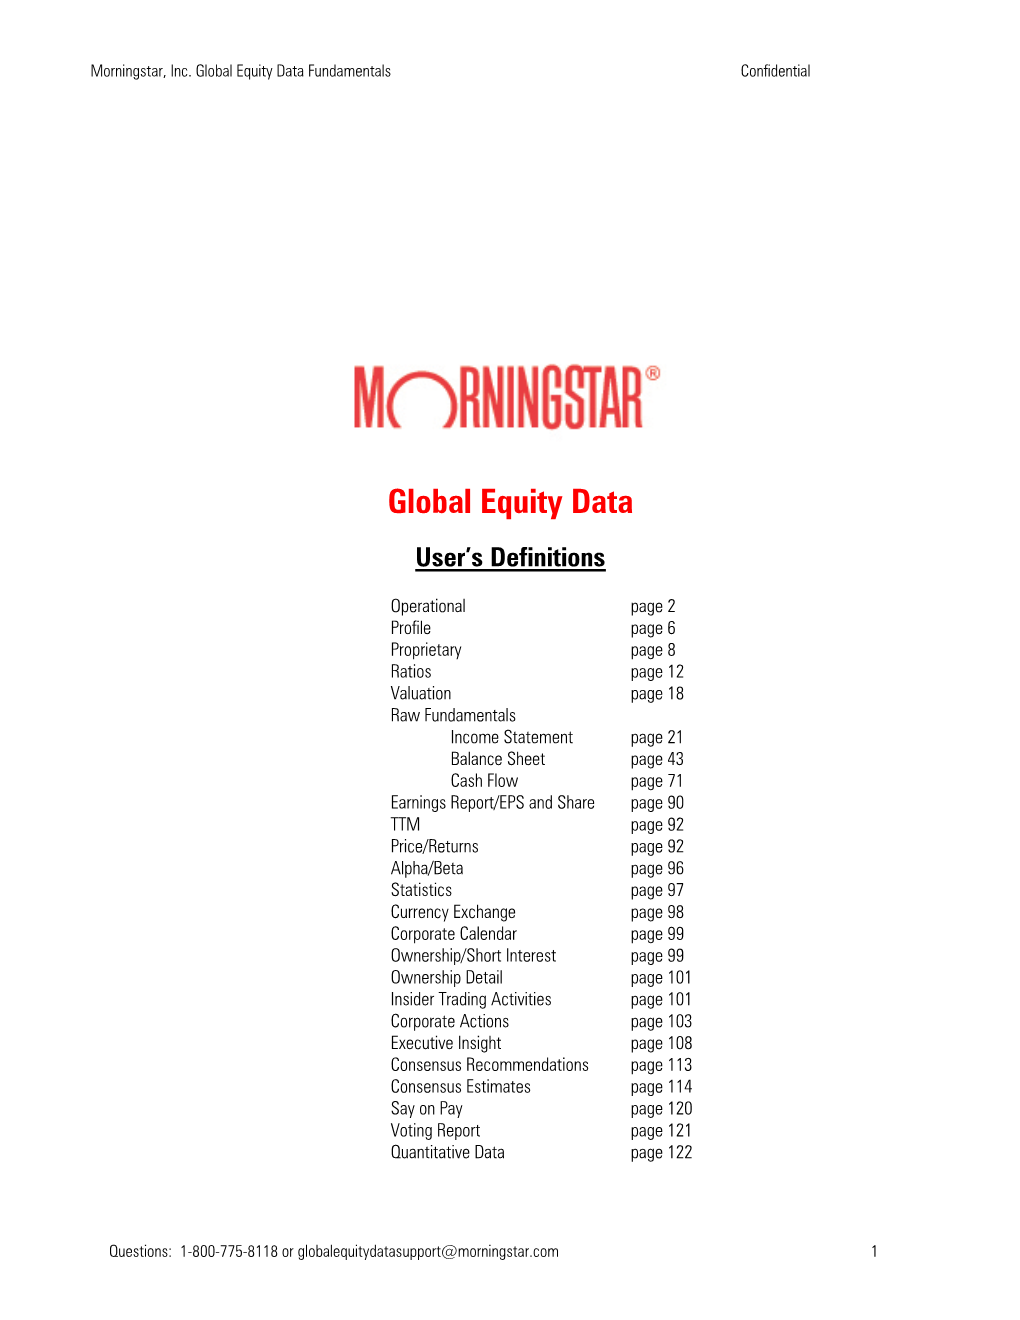 Global Equity Data Fundamentals Confidential